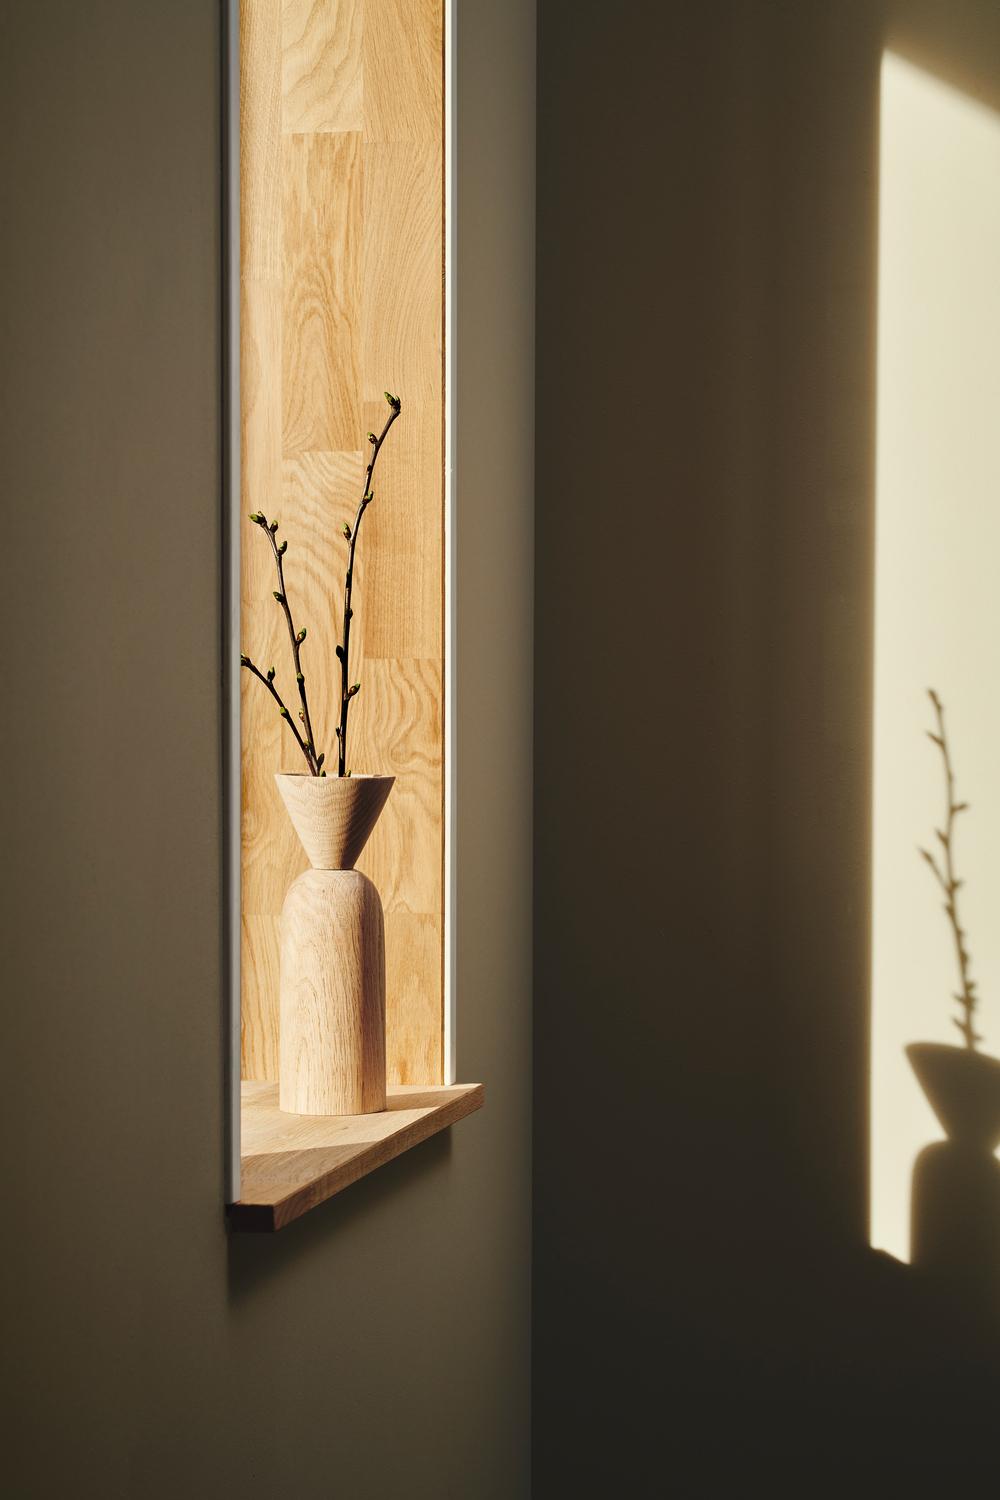 Cone Shape Oak Vase by Applicata
Dimensions: D 9 x W 9 x H 25 cm
Materials: Oak.

Available in Ball, Cone, and Bowl shape.
Available in oak, smoked oak, and black stained oak.

The Shape vase collection is a series of sensuous objects with alluring